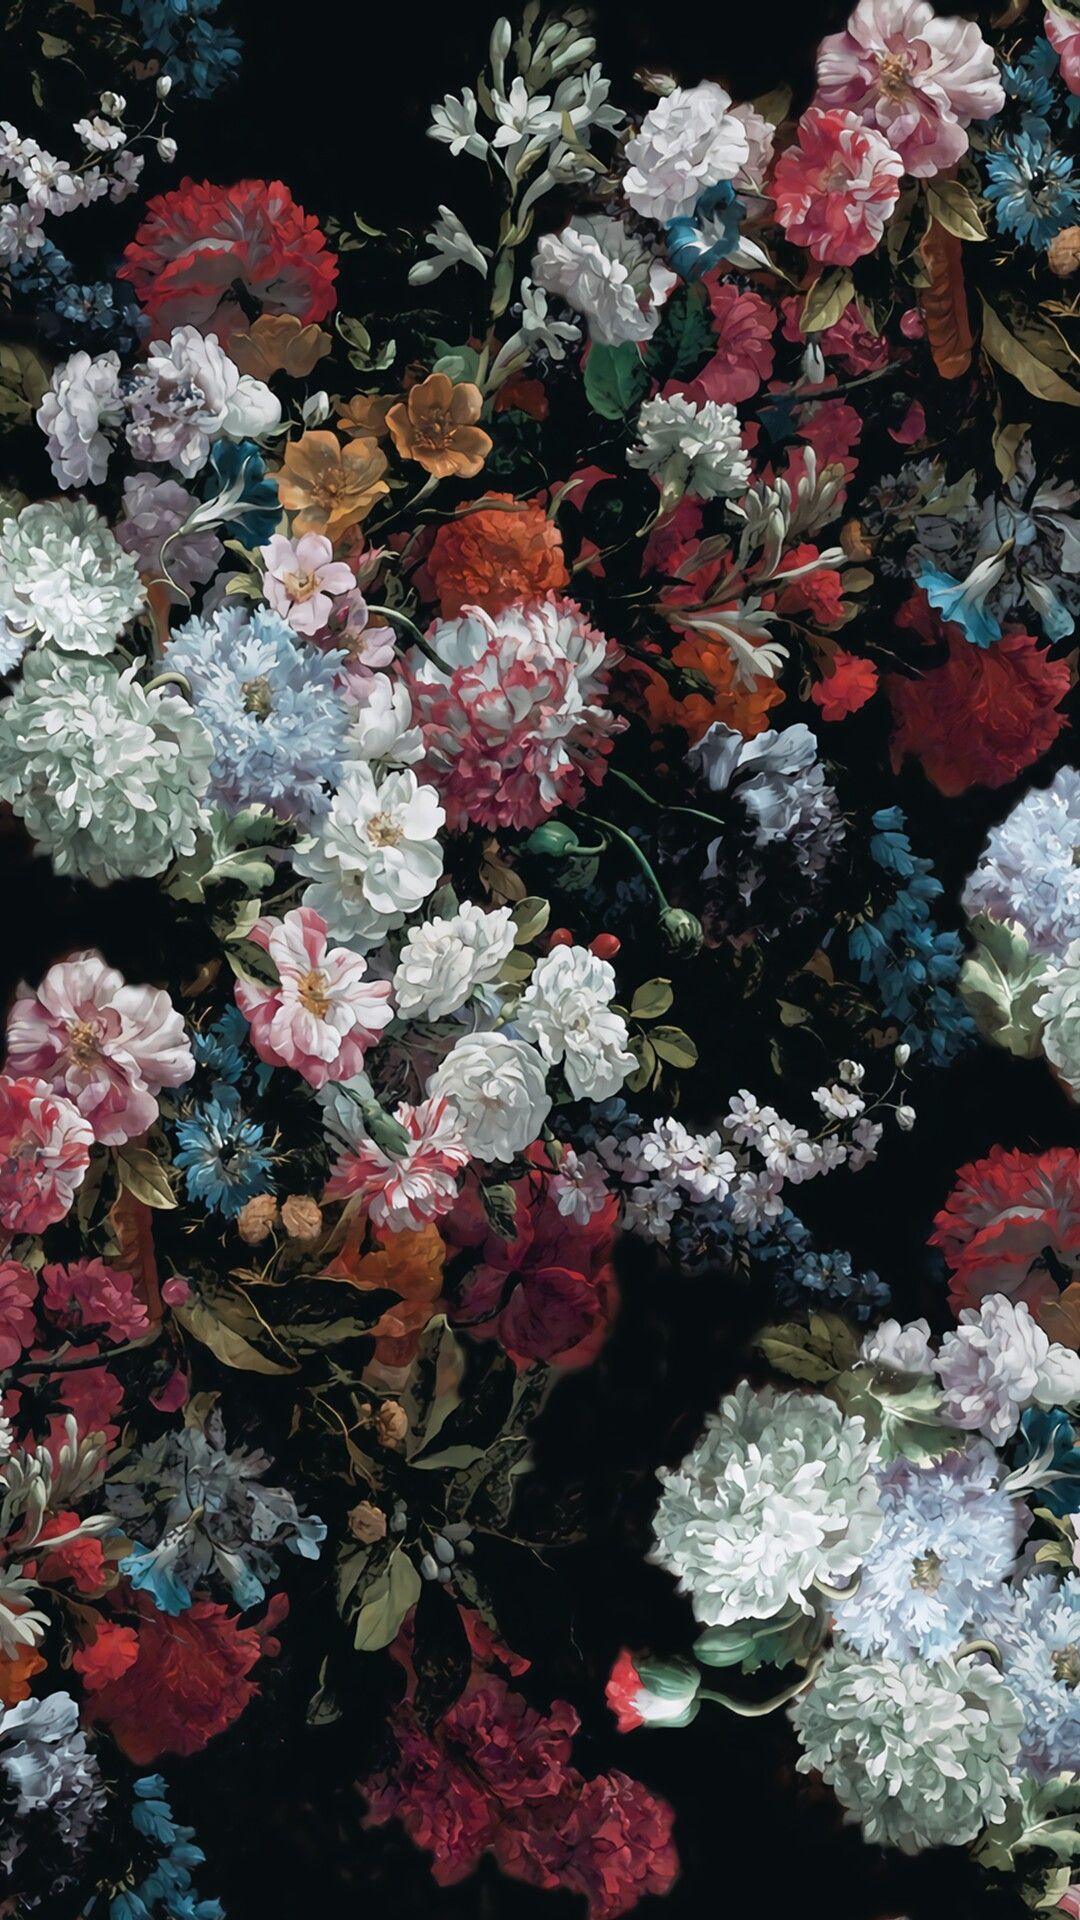 IPhone wallpaper with a black background and colorful flowers - Garden